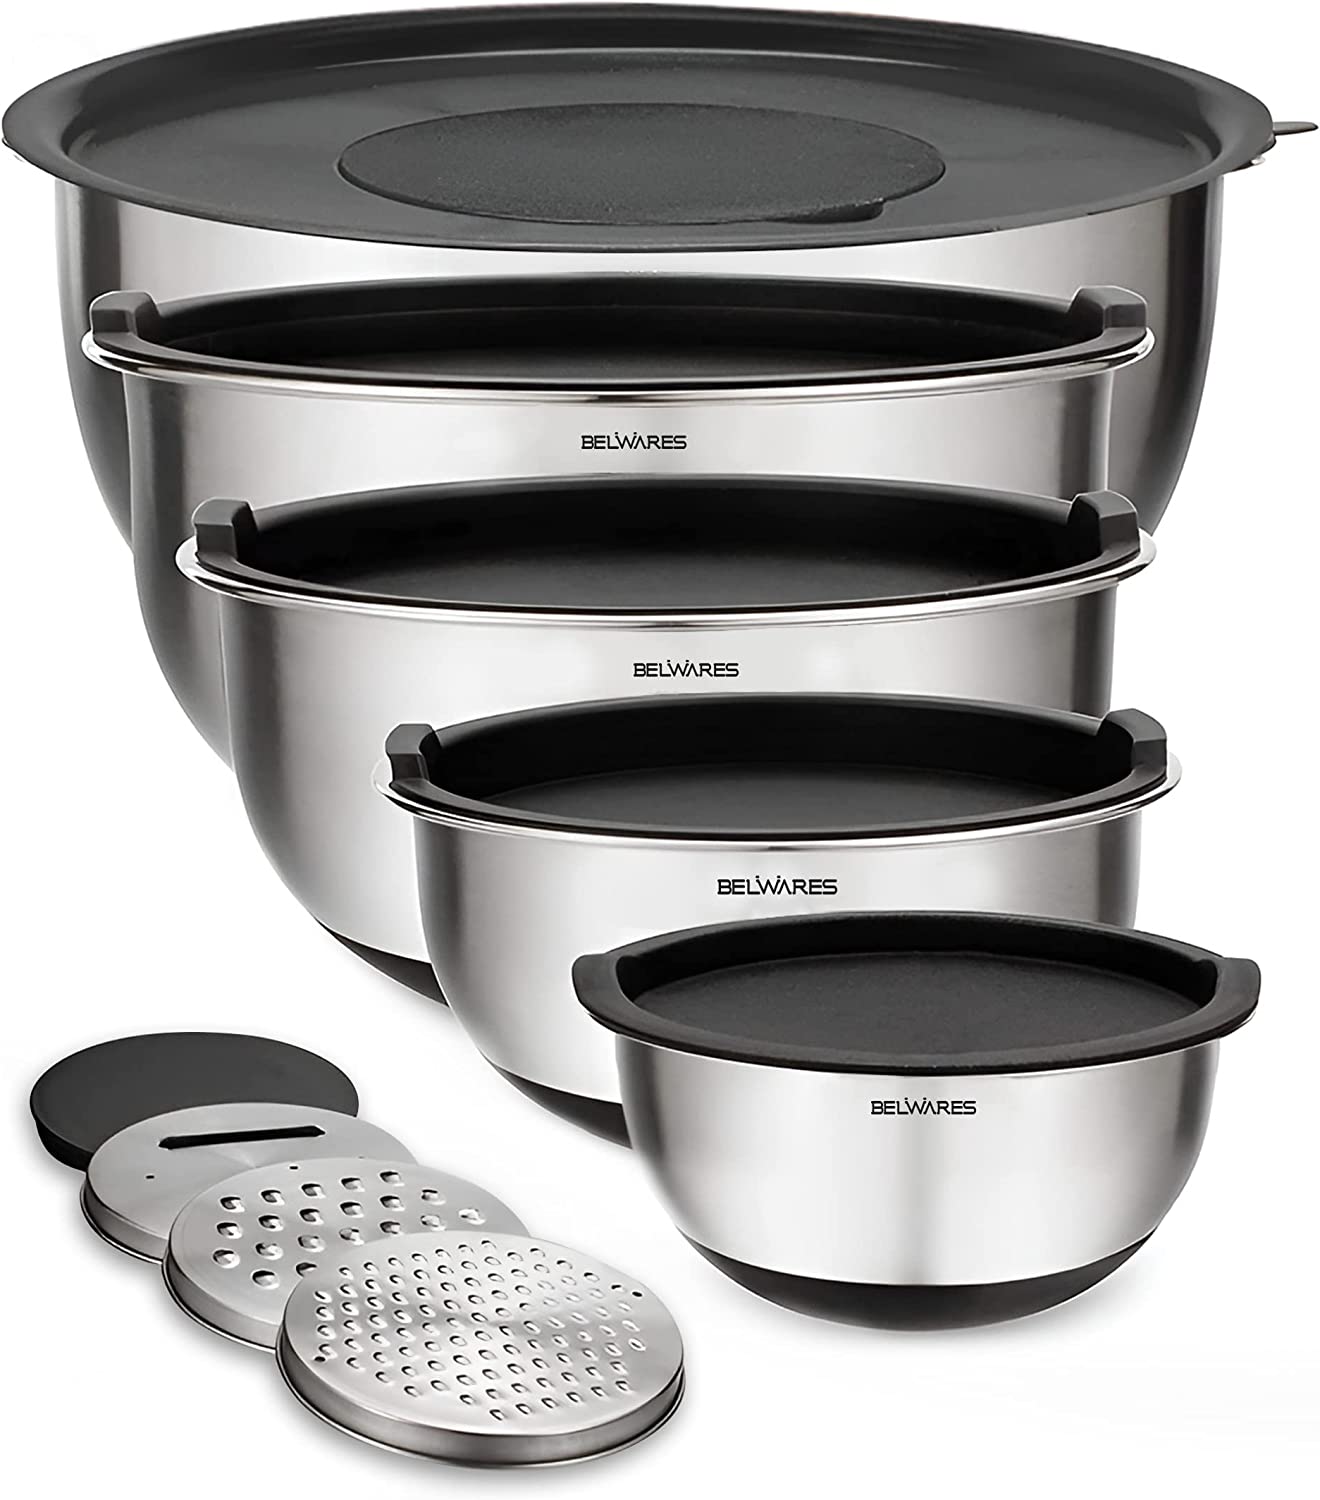 https://bigbigmart.com/wp-content/uploads/2023/03/Belwares-Mixing-Bowls-with-Lids-Set-%E2%80%93-Stainless-Steel-Mixing-Bowl-Set-Including-Airtight-Lids-and-Graters-%E2%80%93-Stainless-Steel-Bowls-that-Nest-%E2%80%93-5-Non-Slip-Metal-Bowls-for-Kitchen-with-Pour-Spouts.jpg